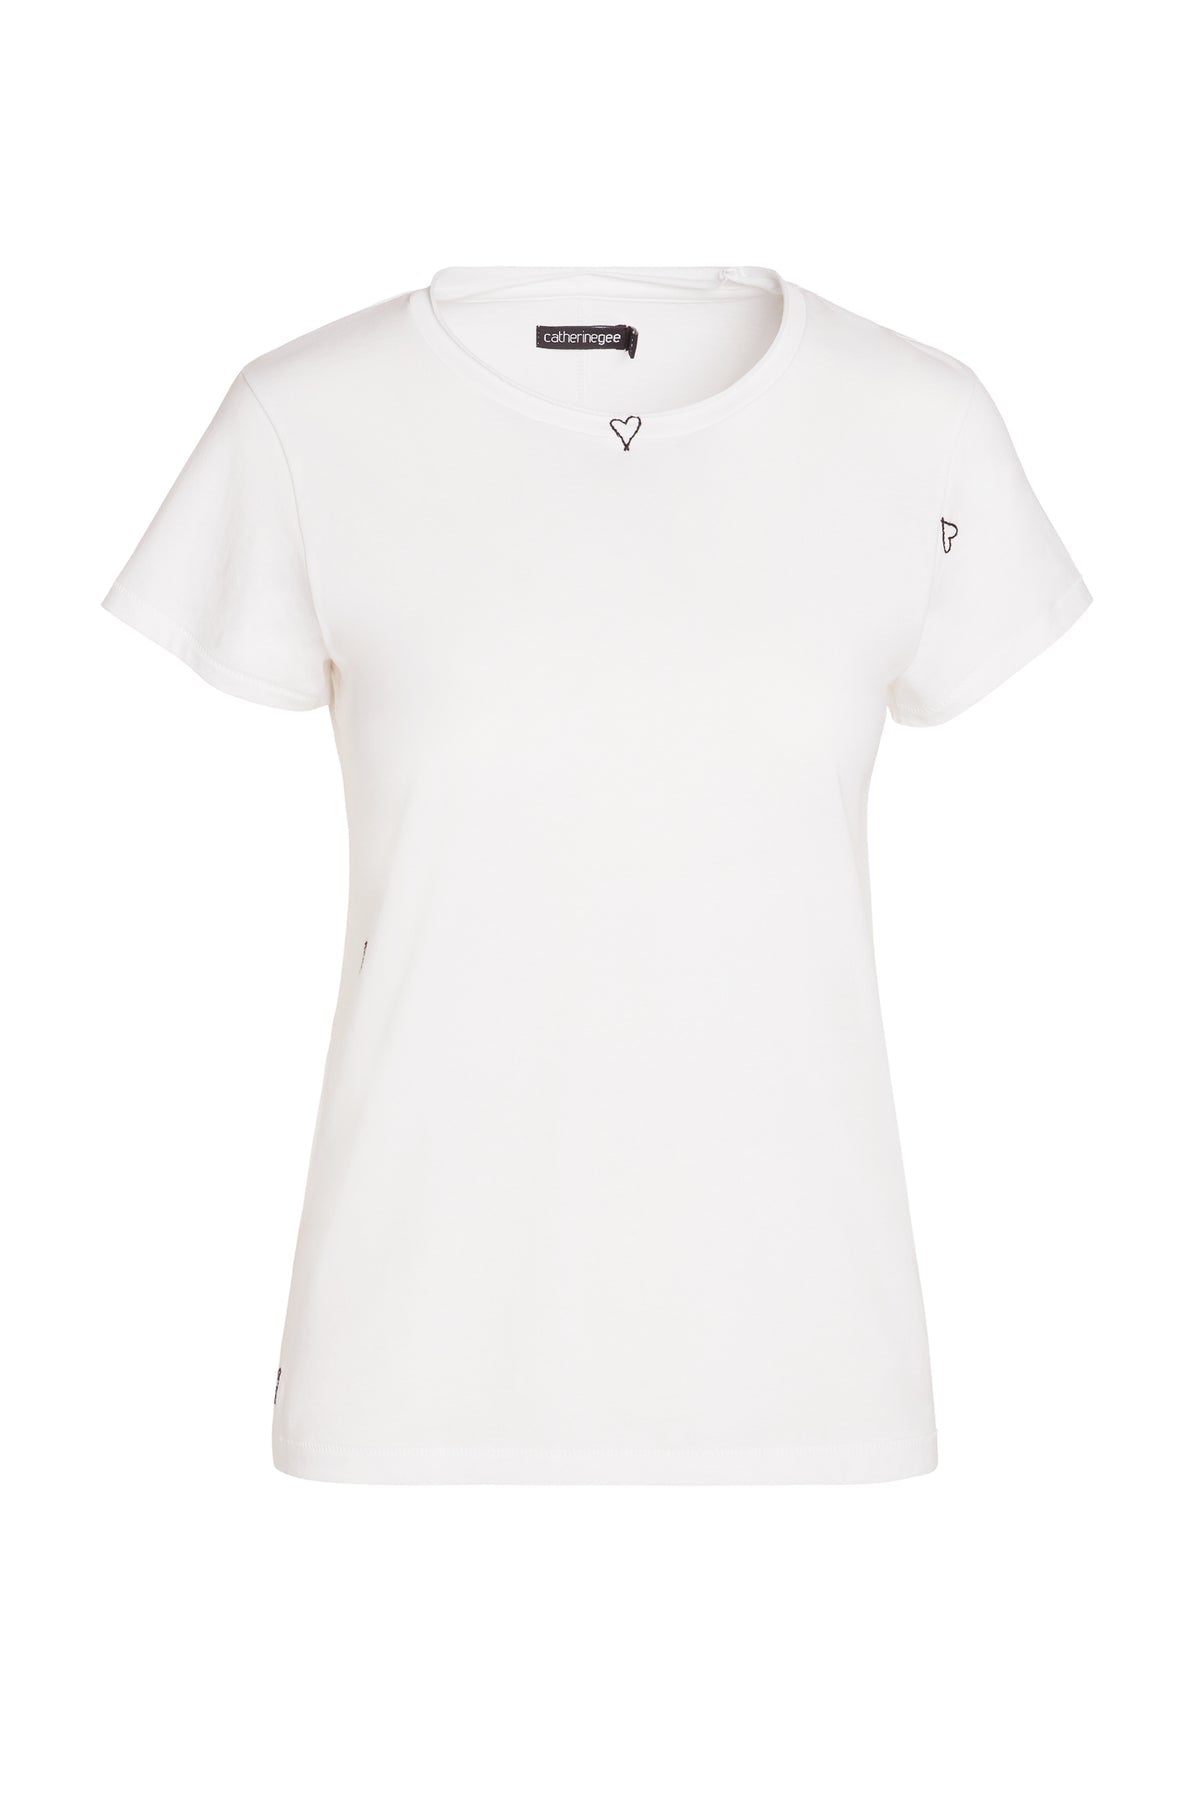 Catherine Gee Embroidered S/S Tee - Heart